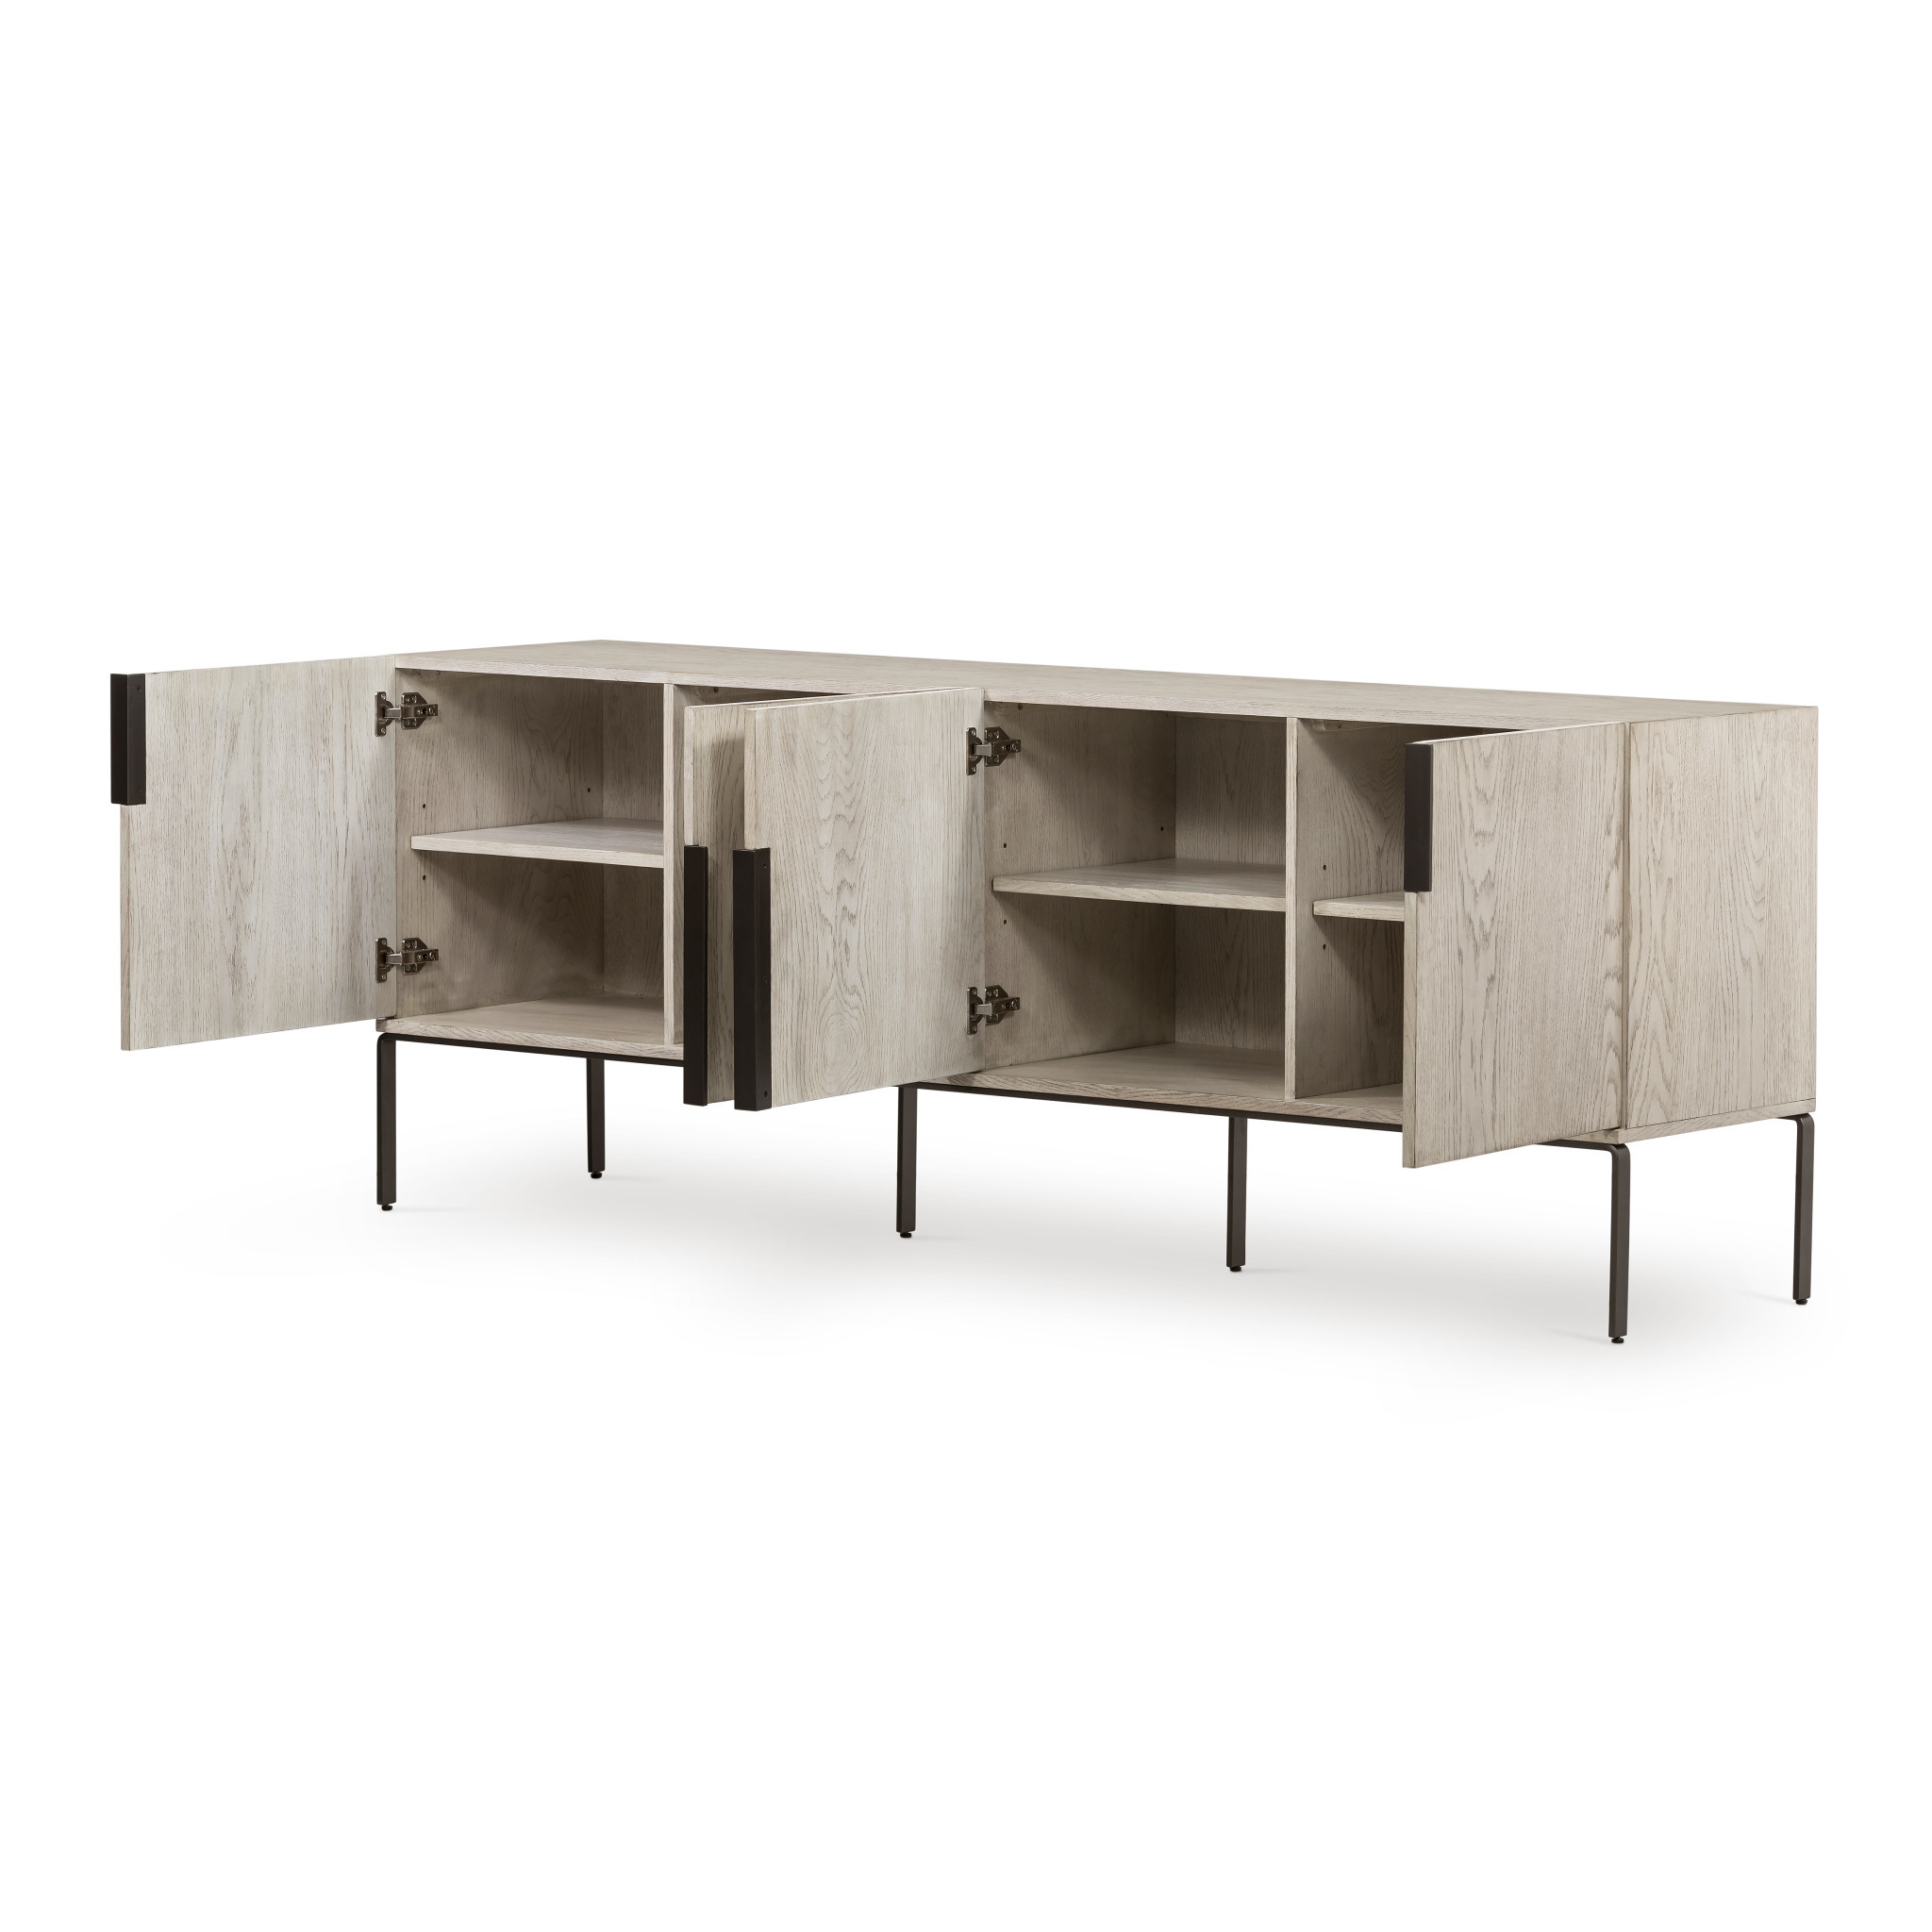 ARCHIE SIDEBOARD